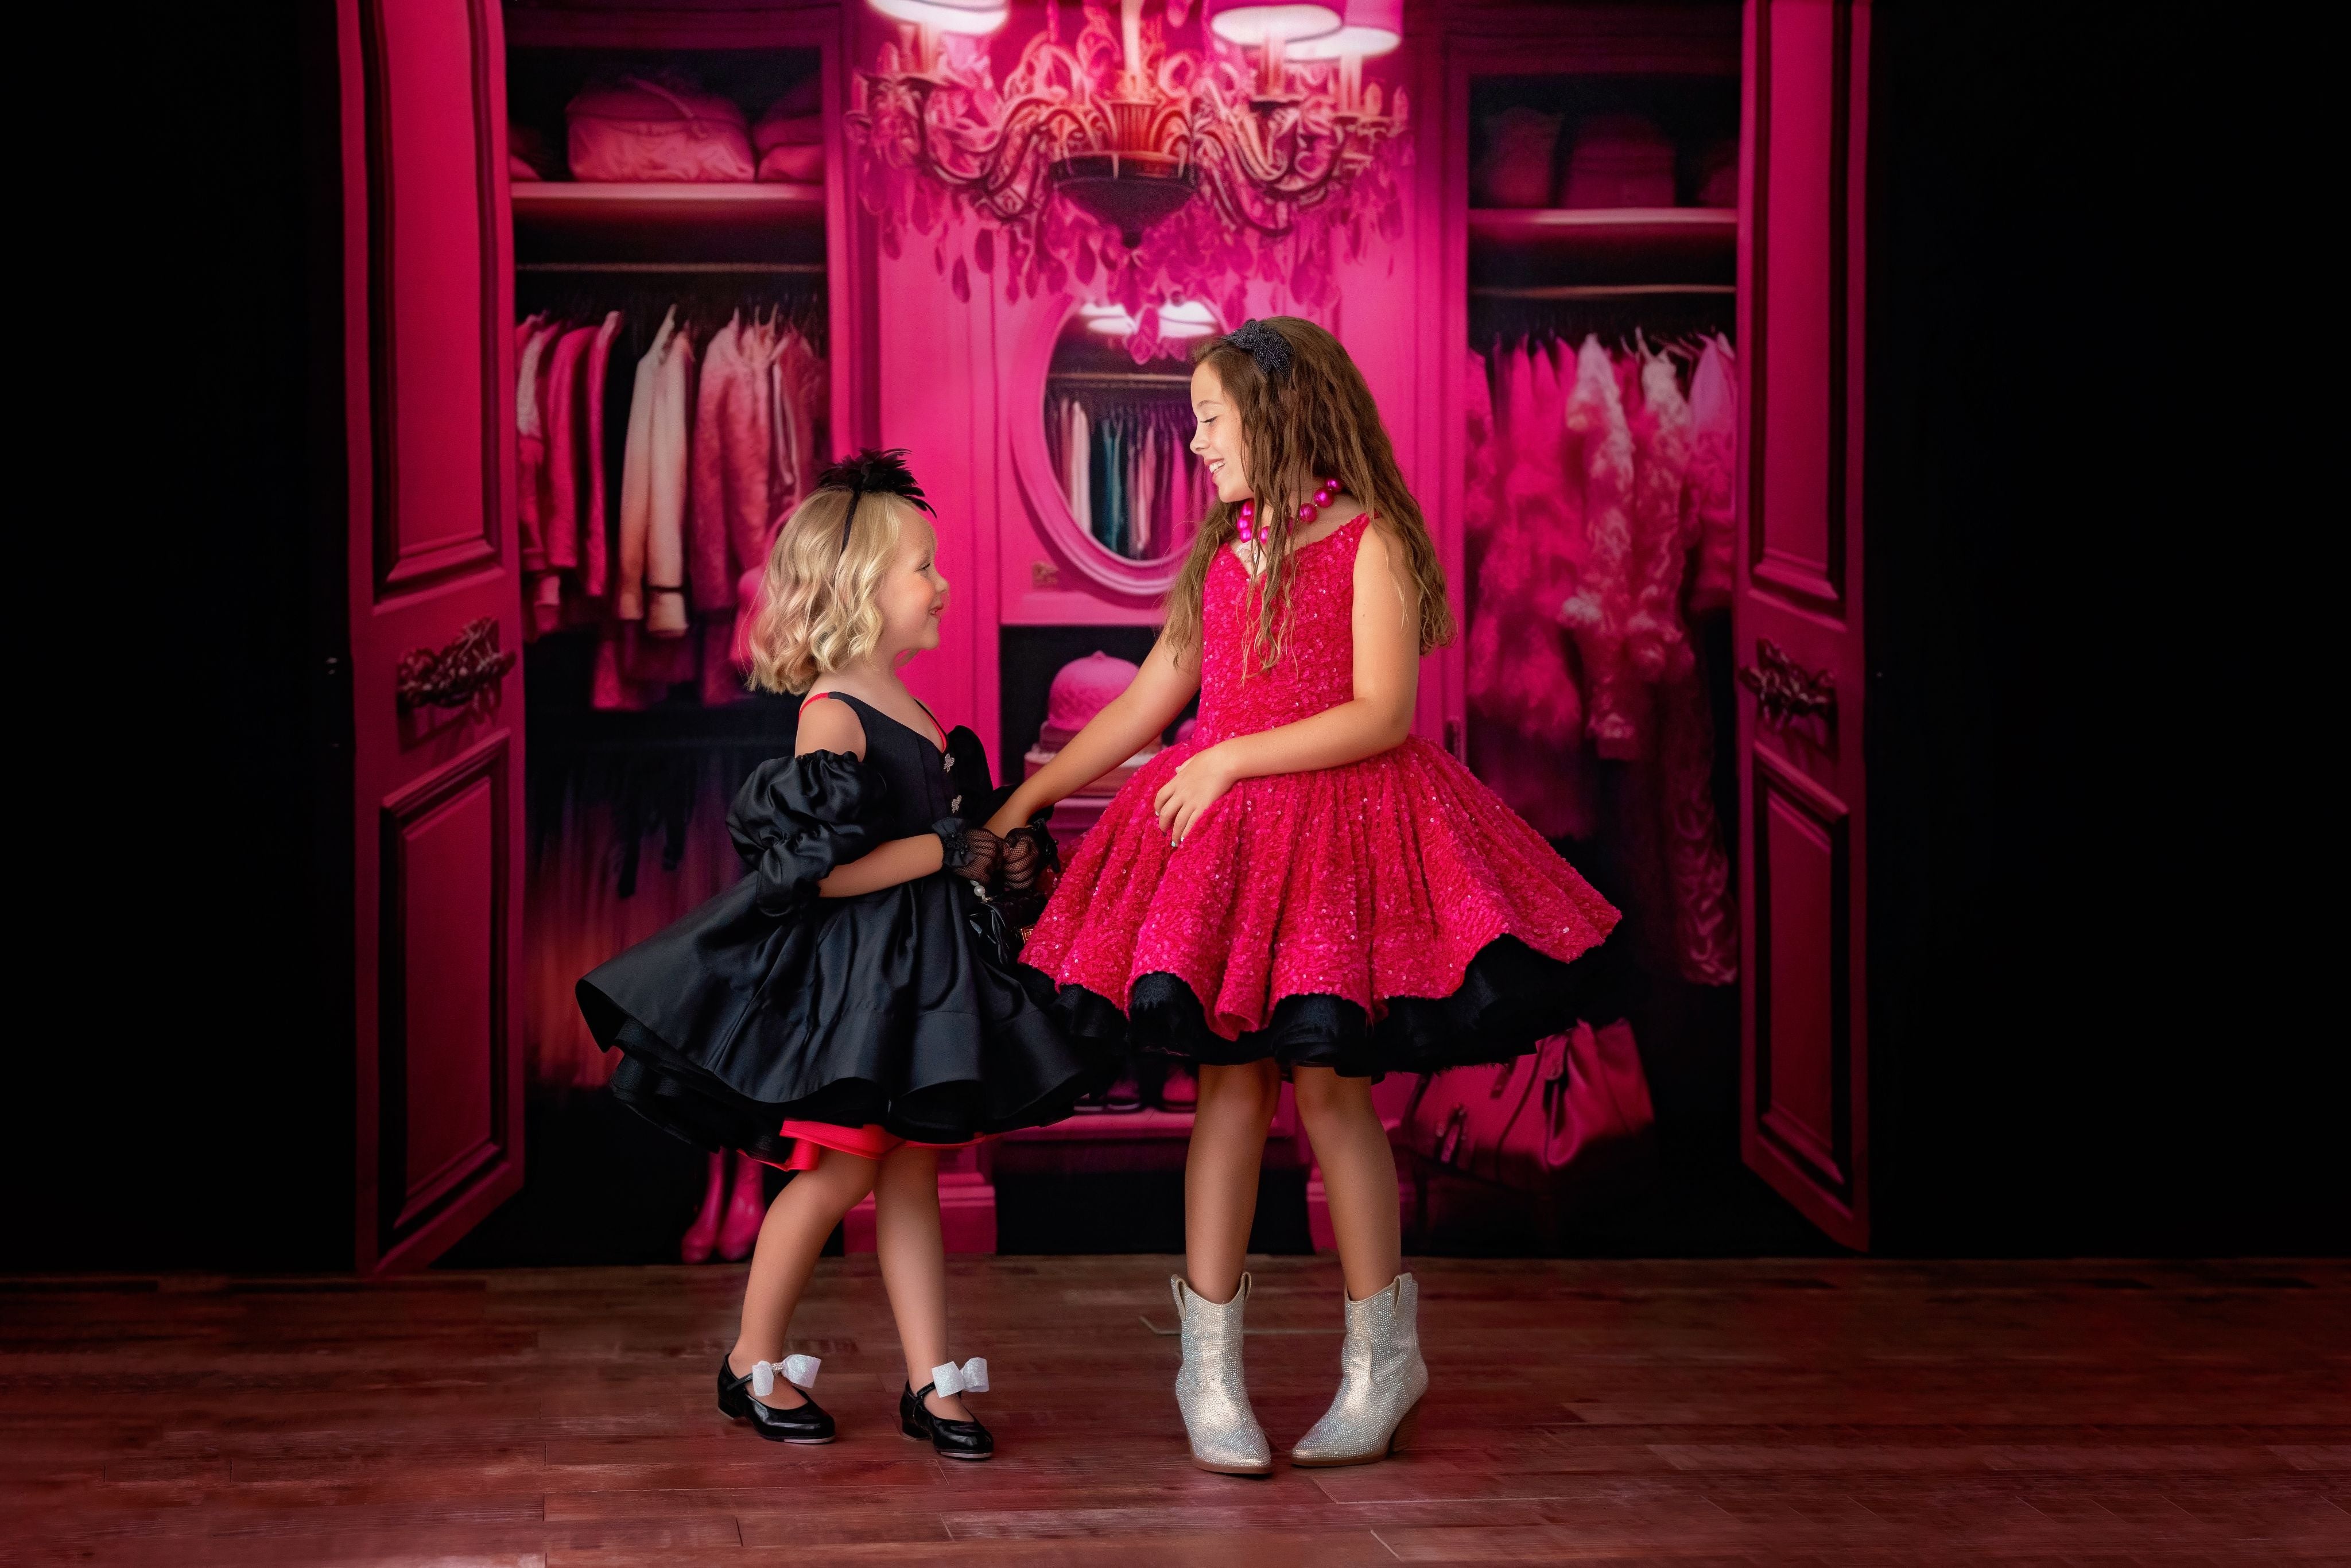 Barbie inspired flip dress, reversible pink and black, dresses for photography sessions, babydream backdrops, dream dress sessions, april massad photography